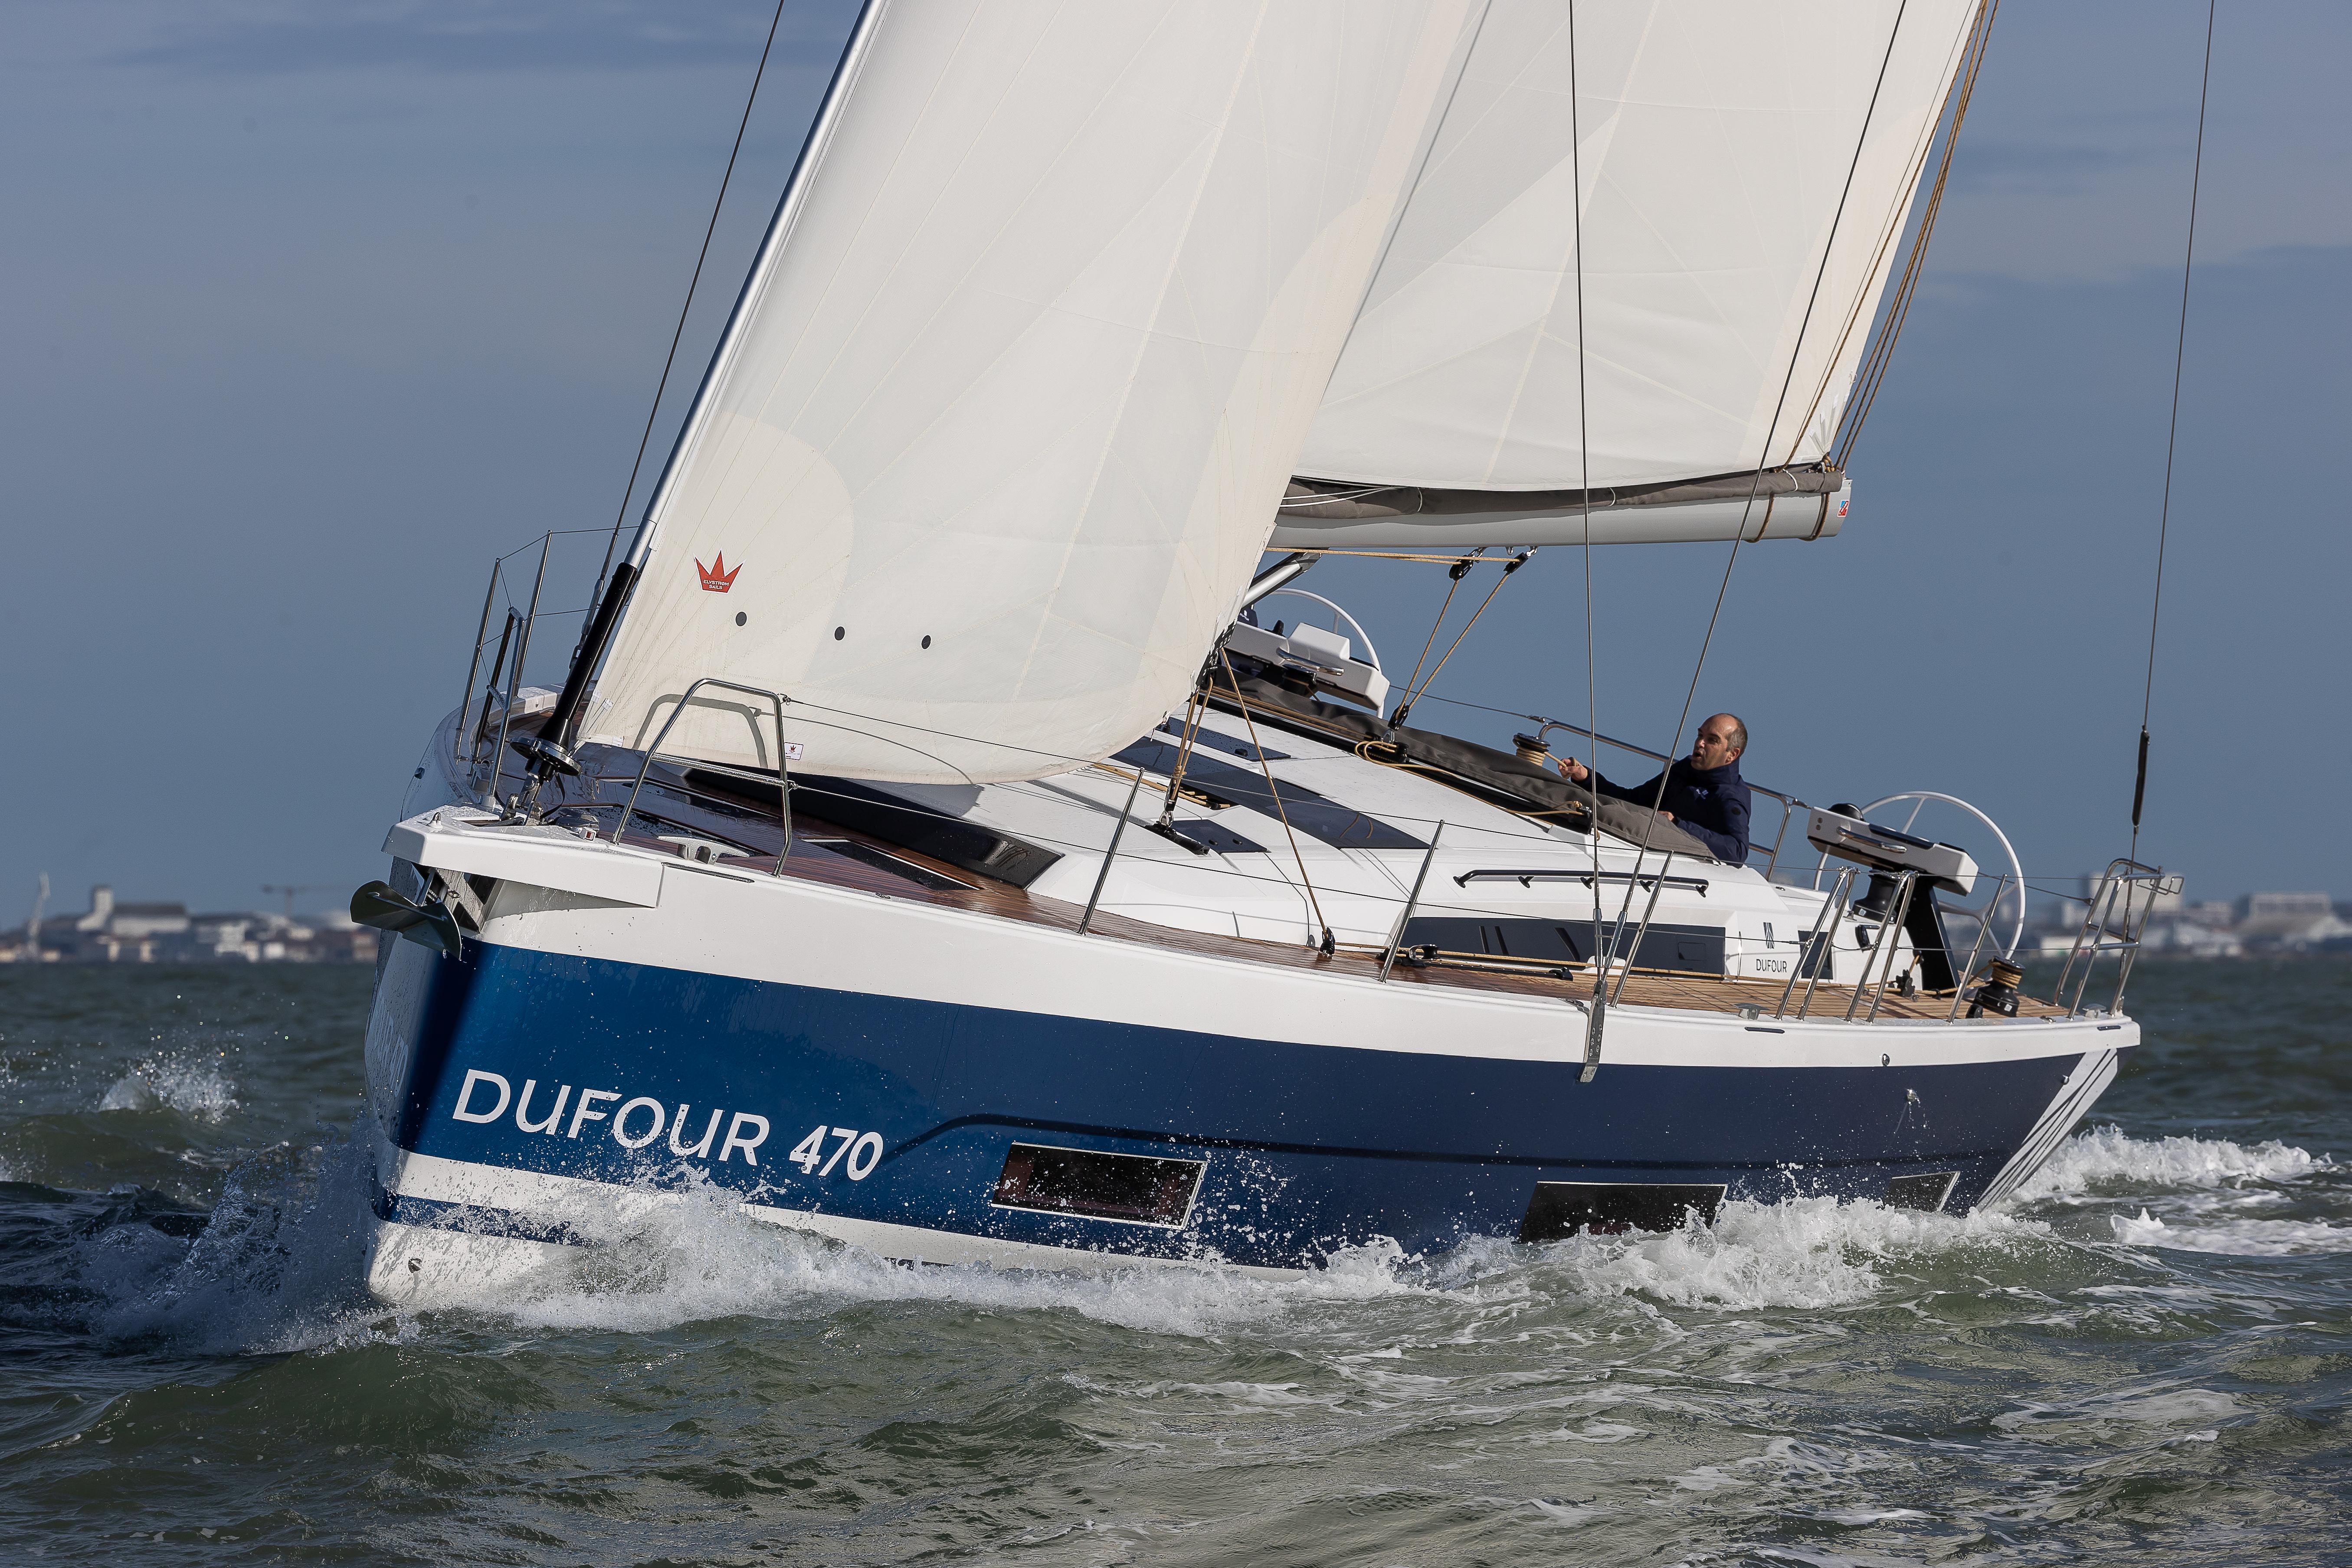 Dufour 47 sailboat for sale in Fort Lauderdale, FL